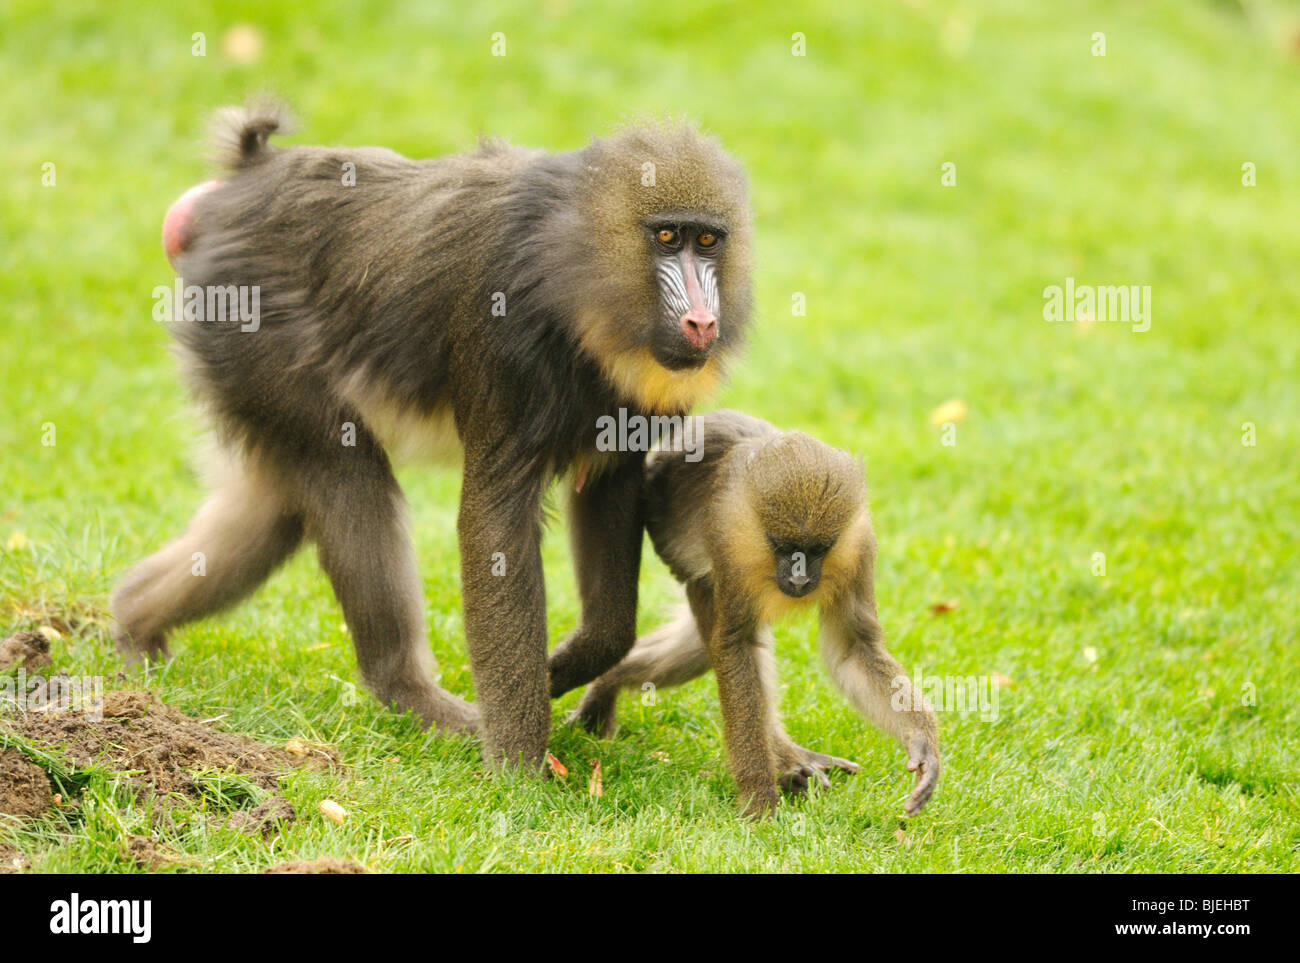 Mandrill (Mandrillus sphinx) mother and young, zoological garden of Augsburg, Germany, side view Stock Photo